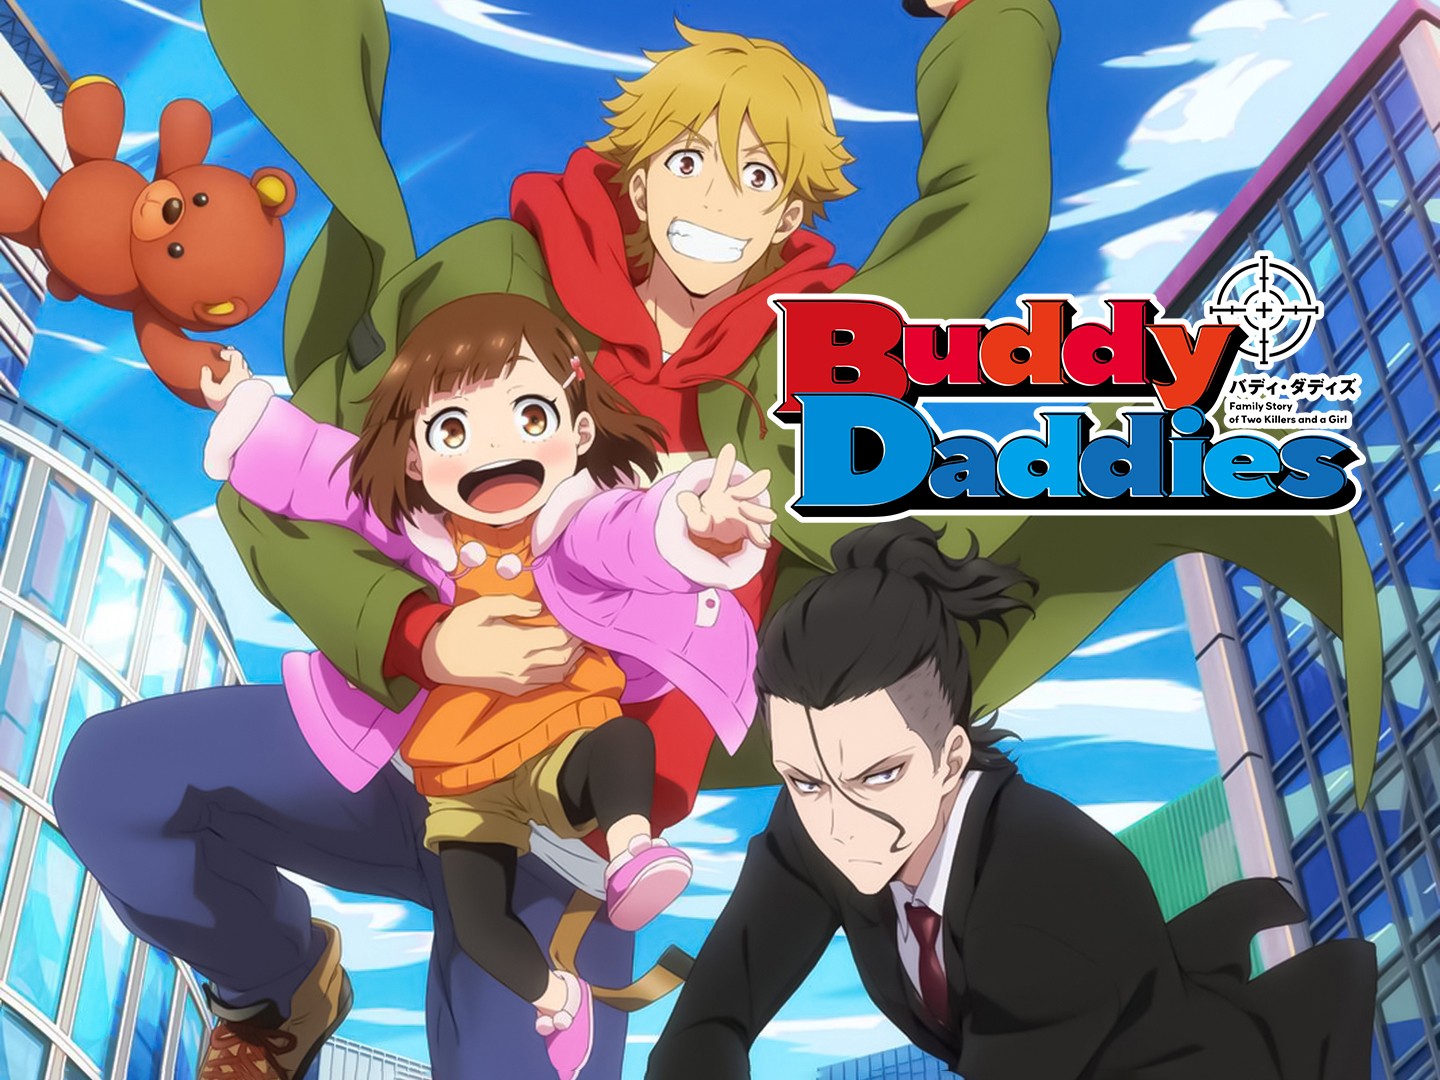 Anime Corner News - NEWS: The new original anime from studio P.A. Works and  Nitroplus, Buddy Daddies, revealed a new trailer! Watch and read more:  https://acani.me/buddy-daddies-pv The plot follows two assassins who